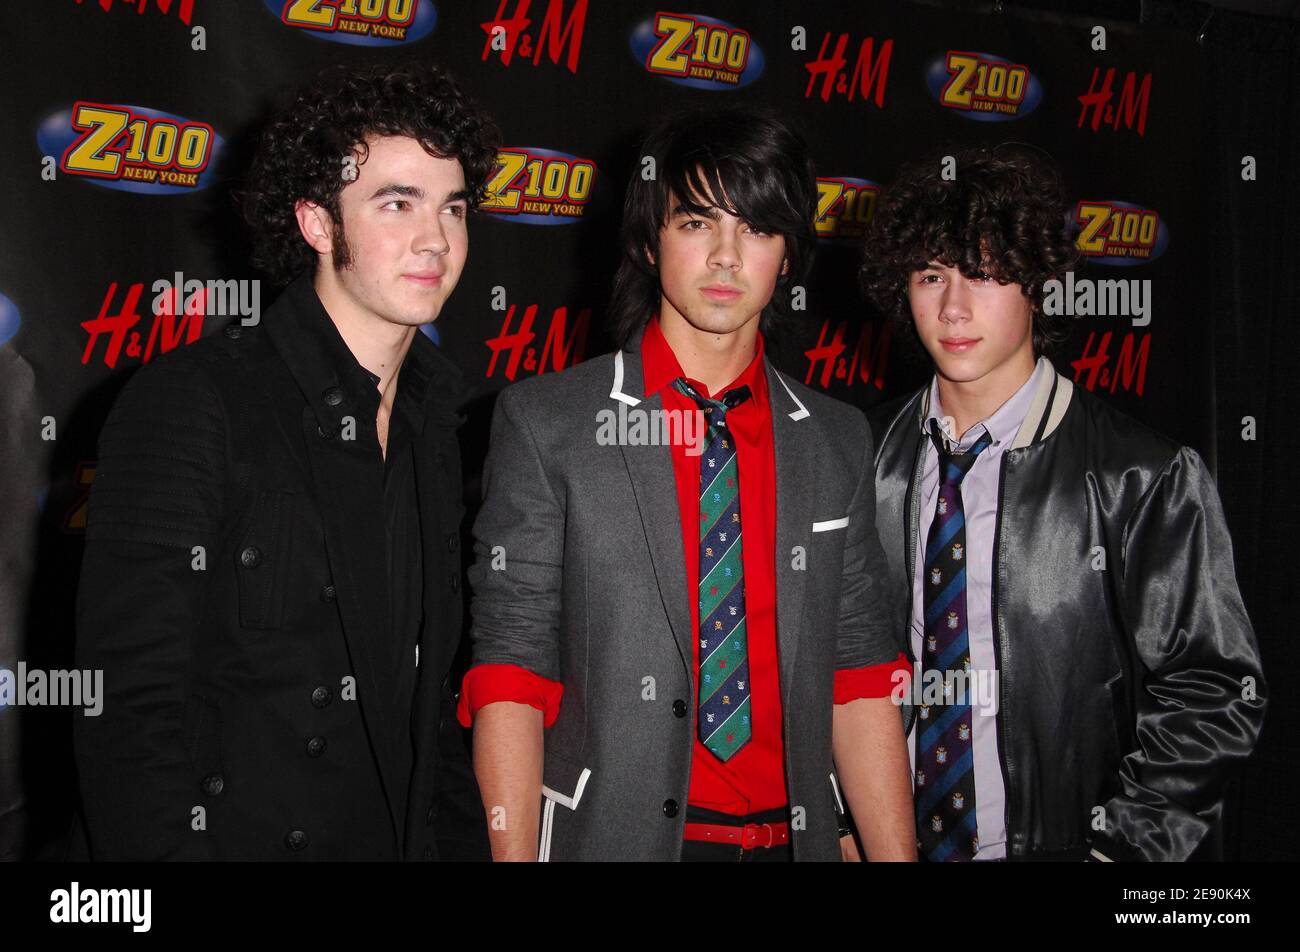 (L-R) Musicians Nick Jonas, Joe Jonas and Kevin Jonas of 'Jonas' pose for a photo in the press room during Z100's Jingle Ball 2007, held at the Madison Square Garden in New York City, NY, USA on December 14, 2007. Photo by Gregorio Binuya/ABACAPRESS.COM Stock Photo